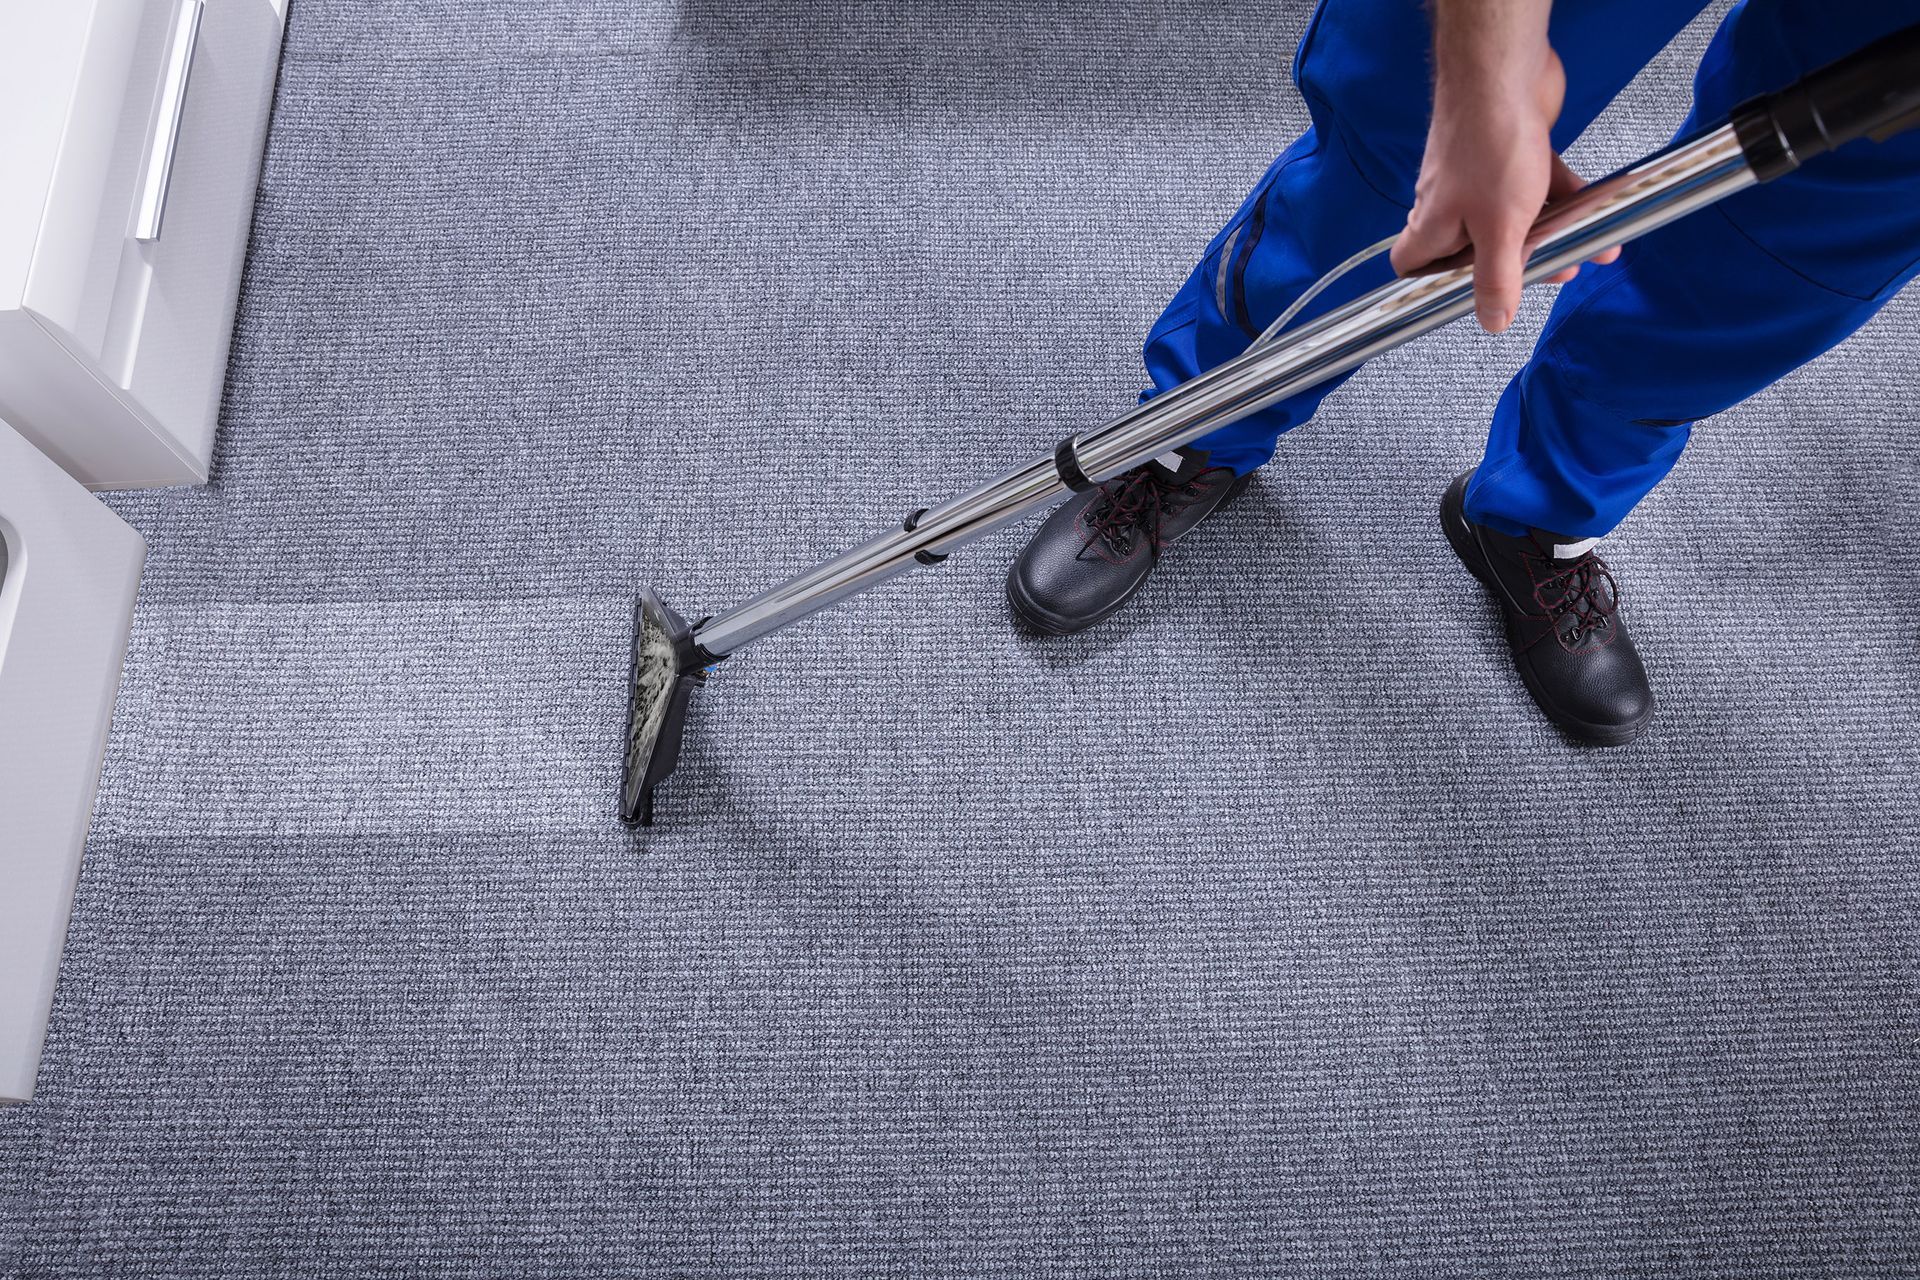 janitors hand cleaning carpet vacuum cleaner